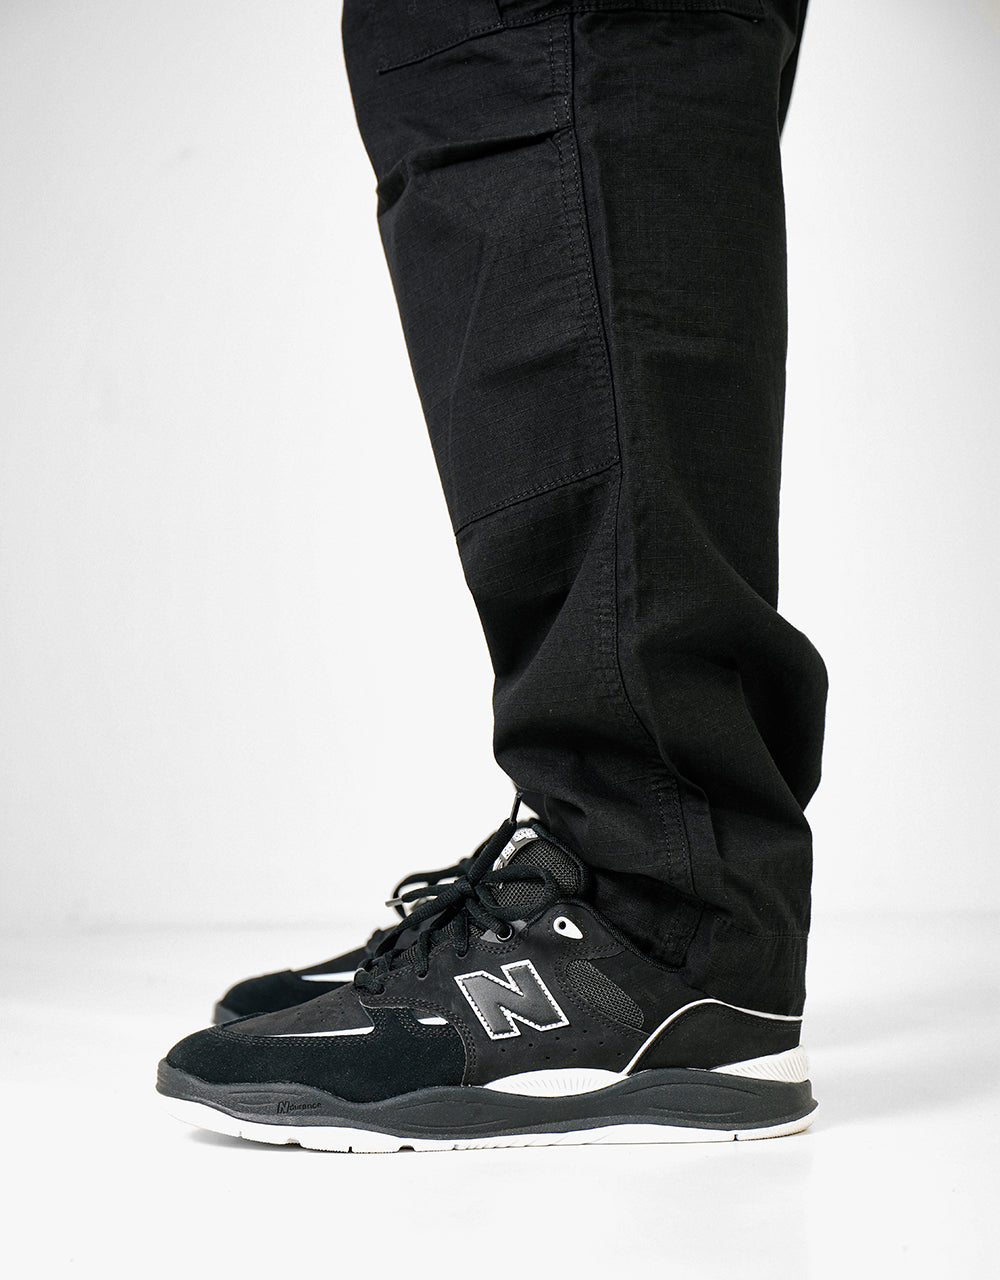 Route One Cargo Pants - Black